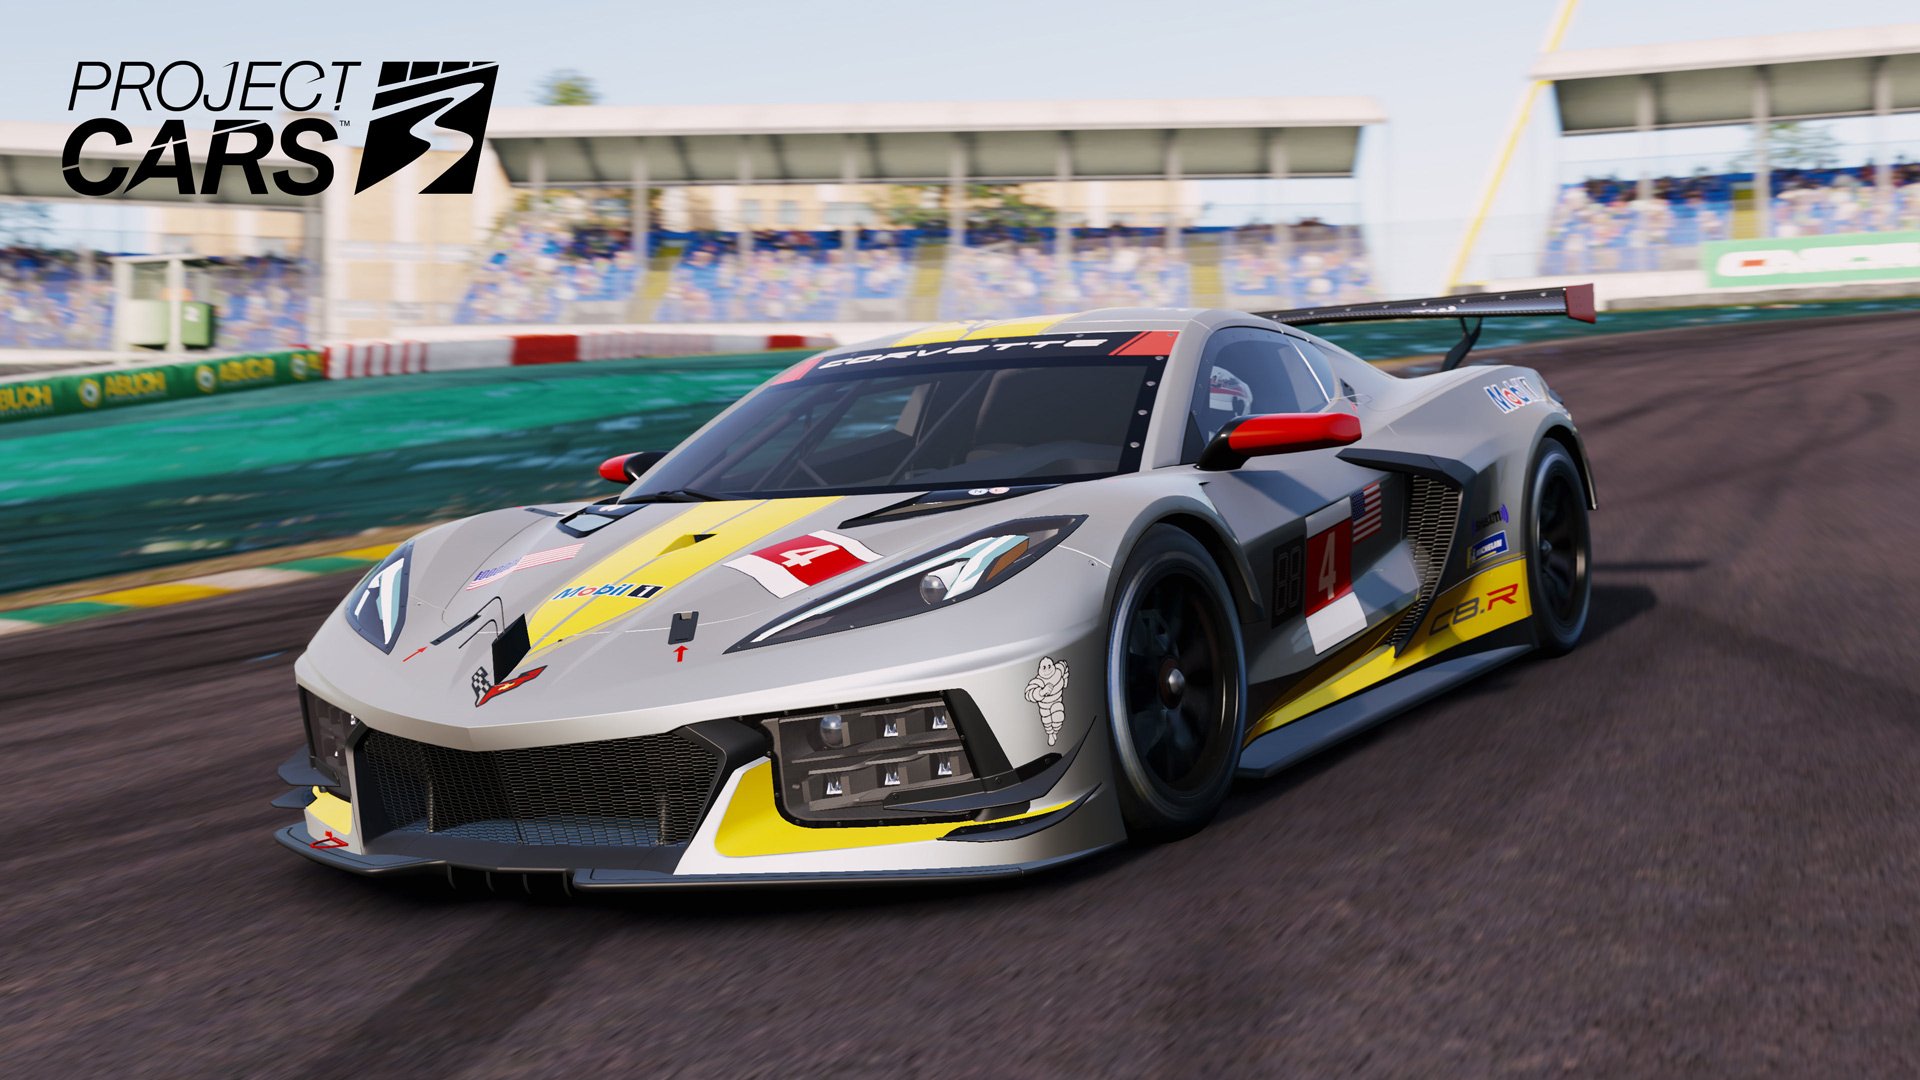 ‘Project CARS 3’ Release Date Confirmed, PC VR Support Included at Launch